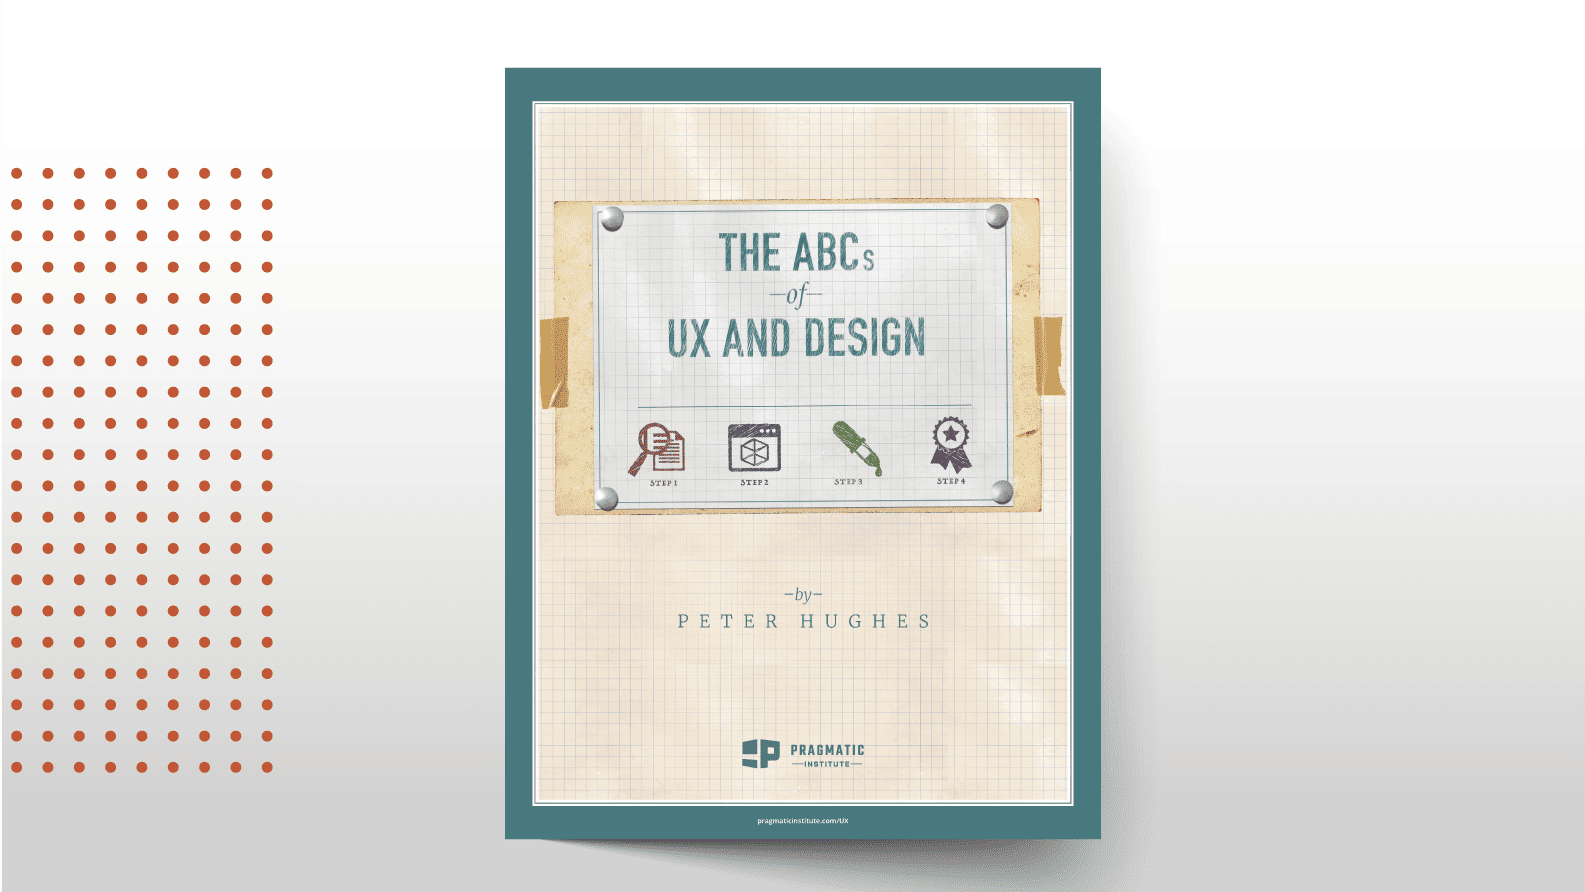 The ABCs of UX and Design